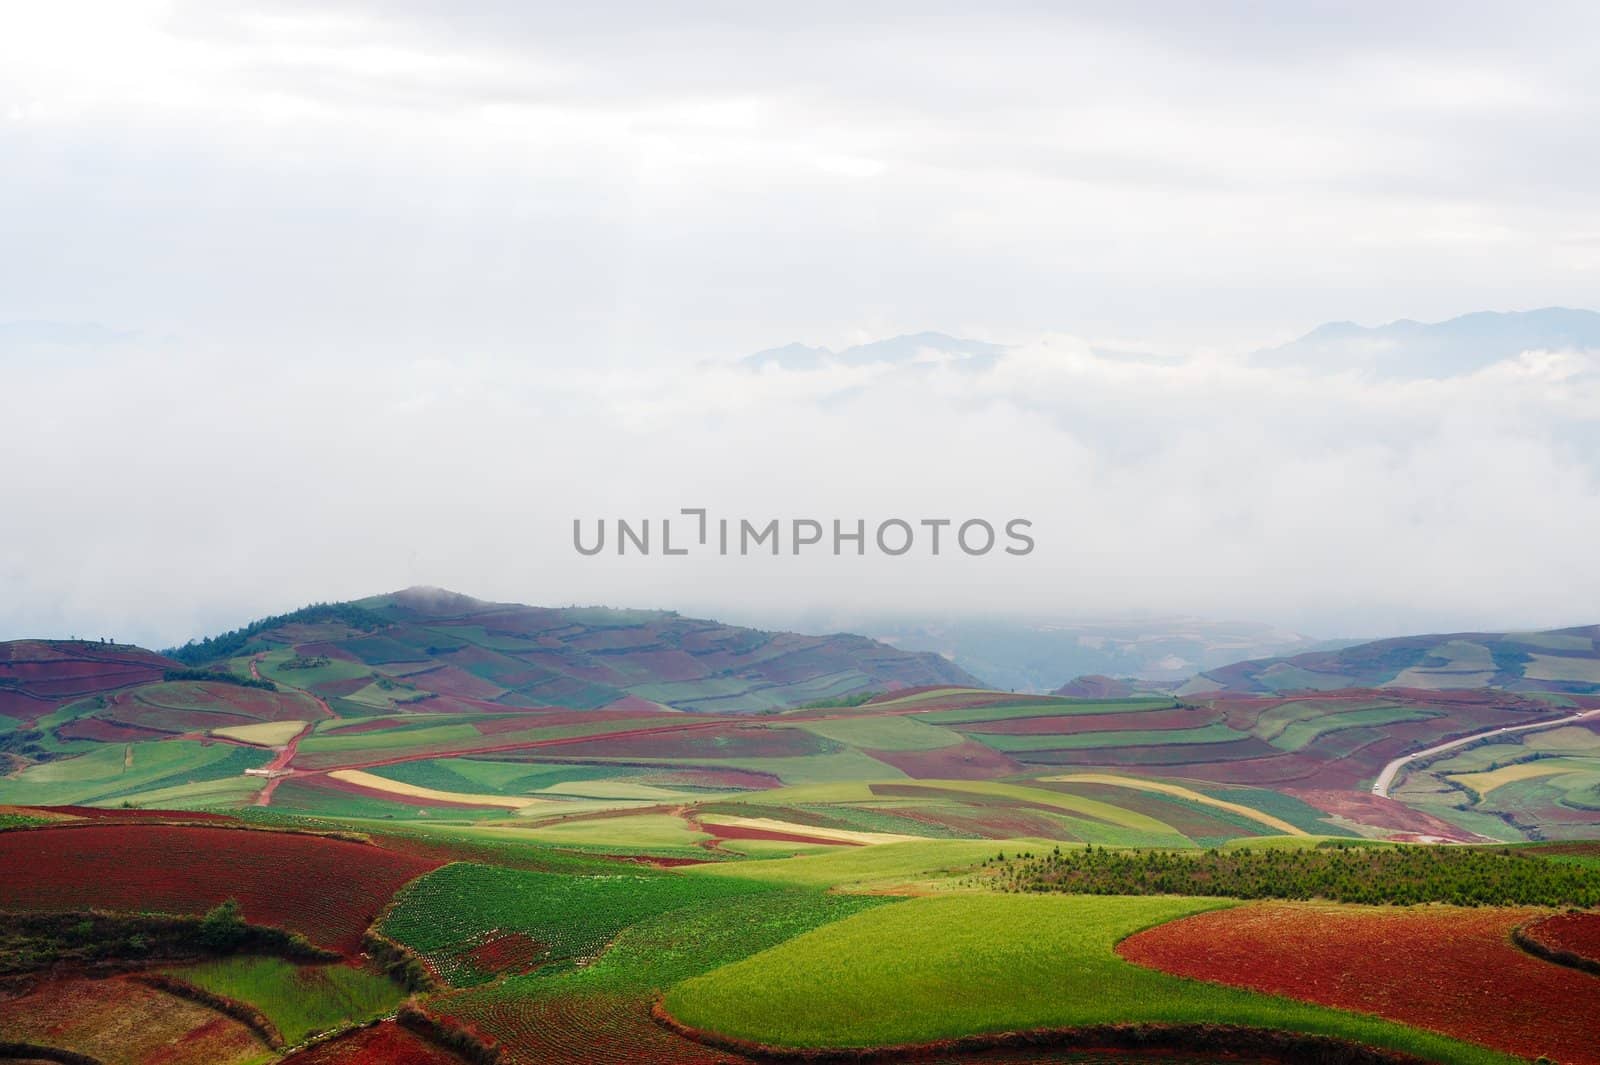 Field landscape in Yunnan Province, southwest of China